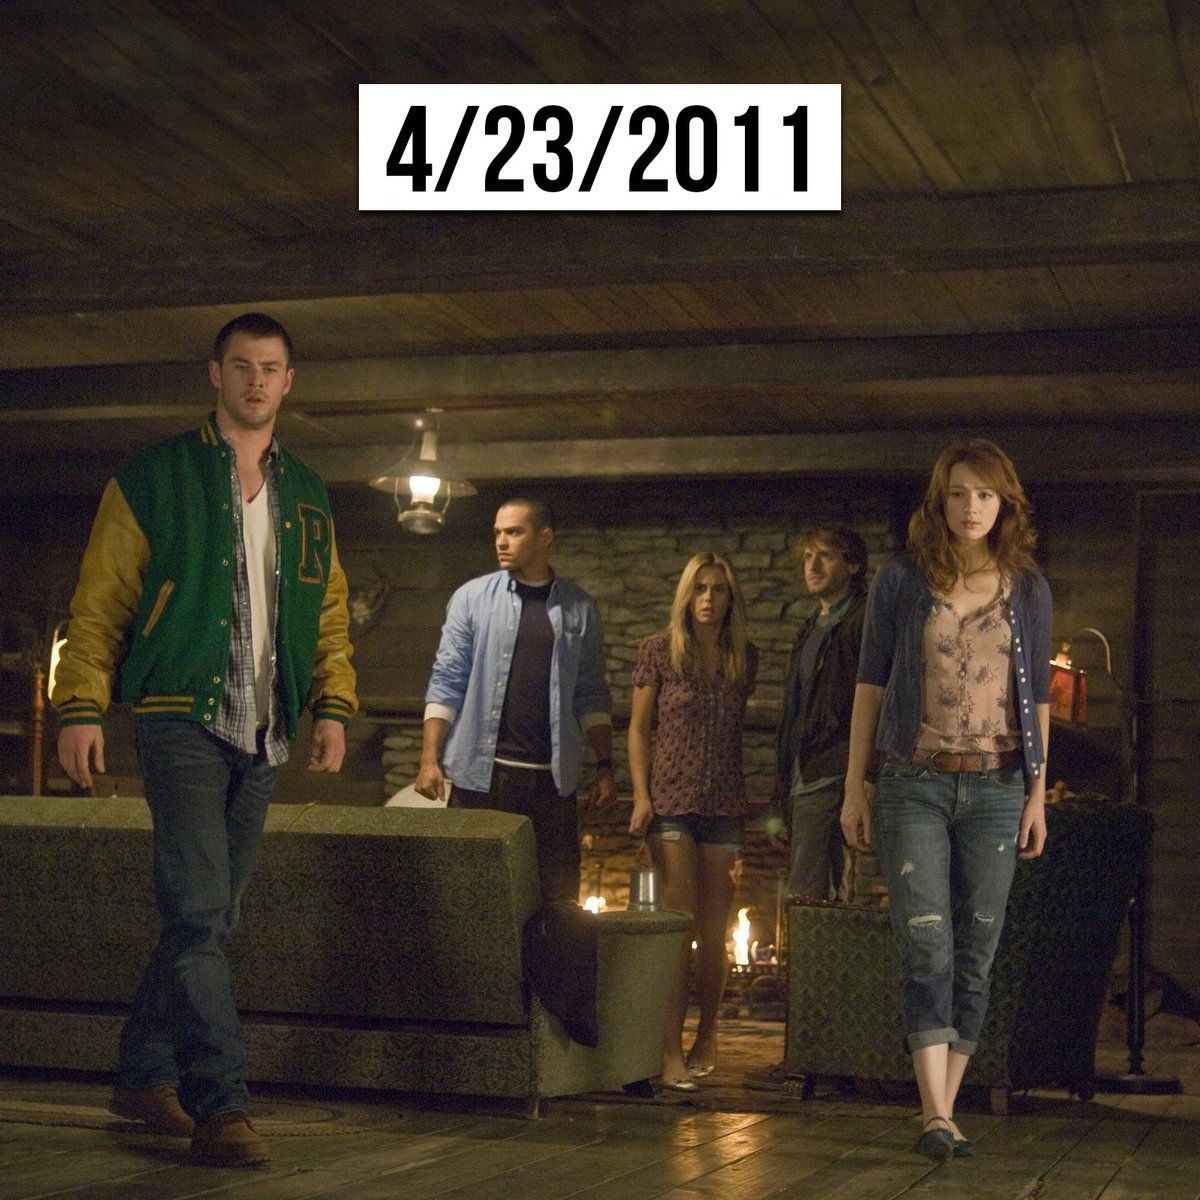 April 23rd – On this day in #HorrorHistory five friends arrived at a remote Cabin in the Woods, but things quickly get weird.